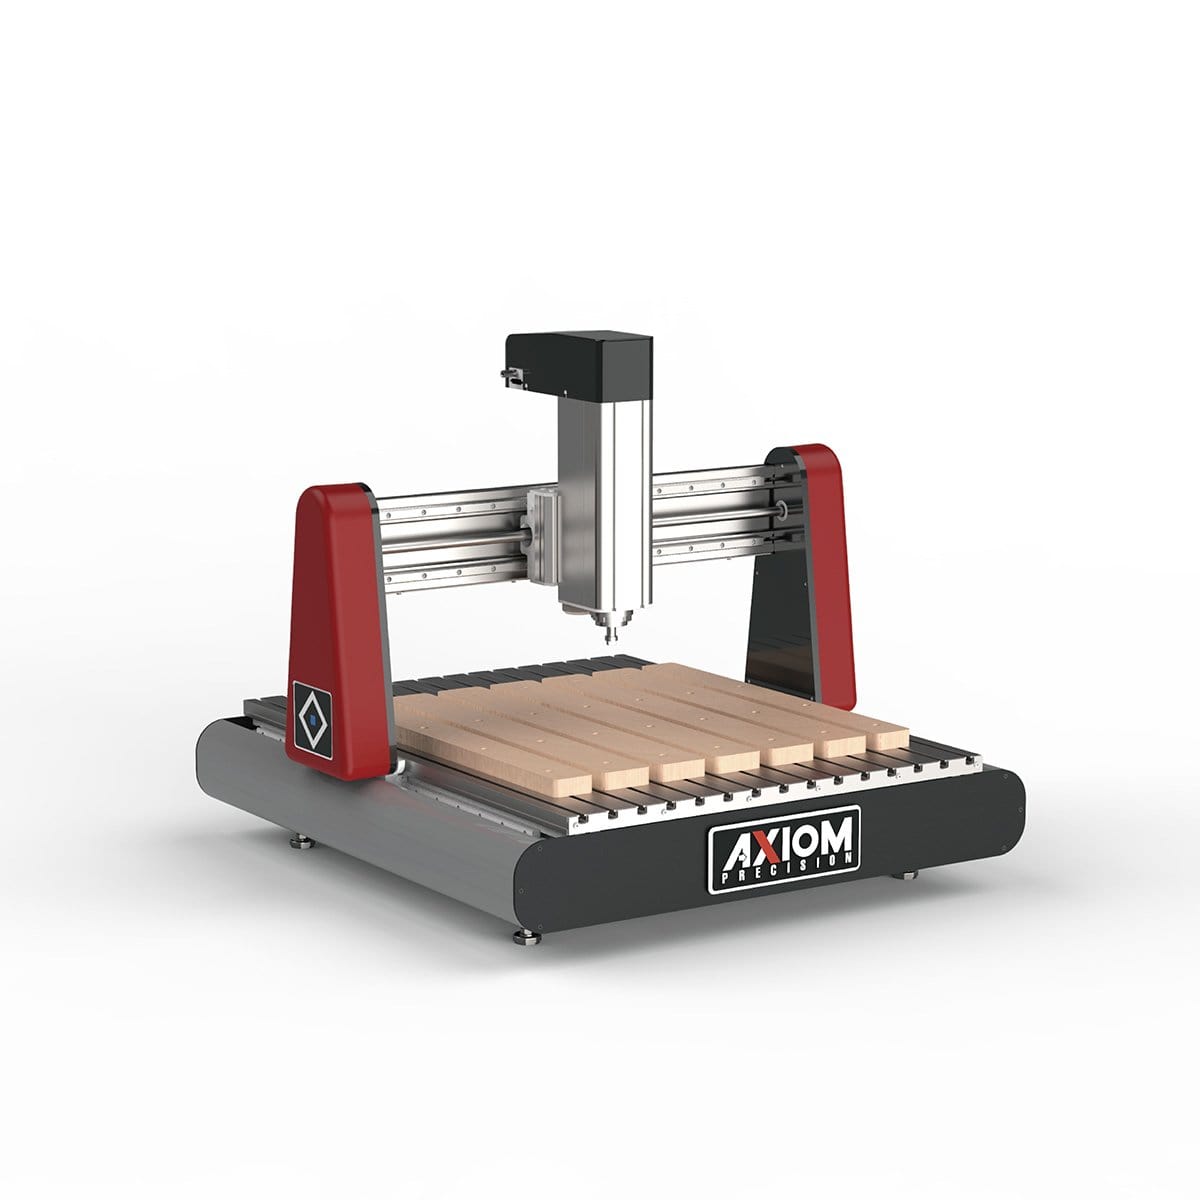 Axiom Precision ICONIC4 CNC Router Iconic Series 24" x 24" CNC Router